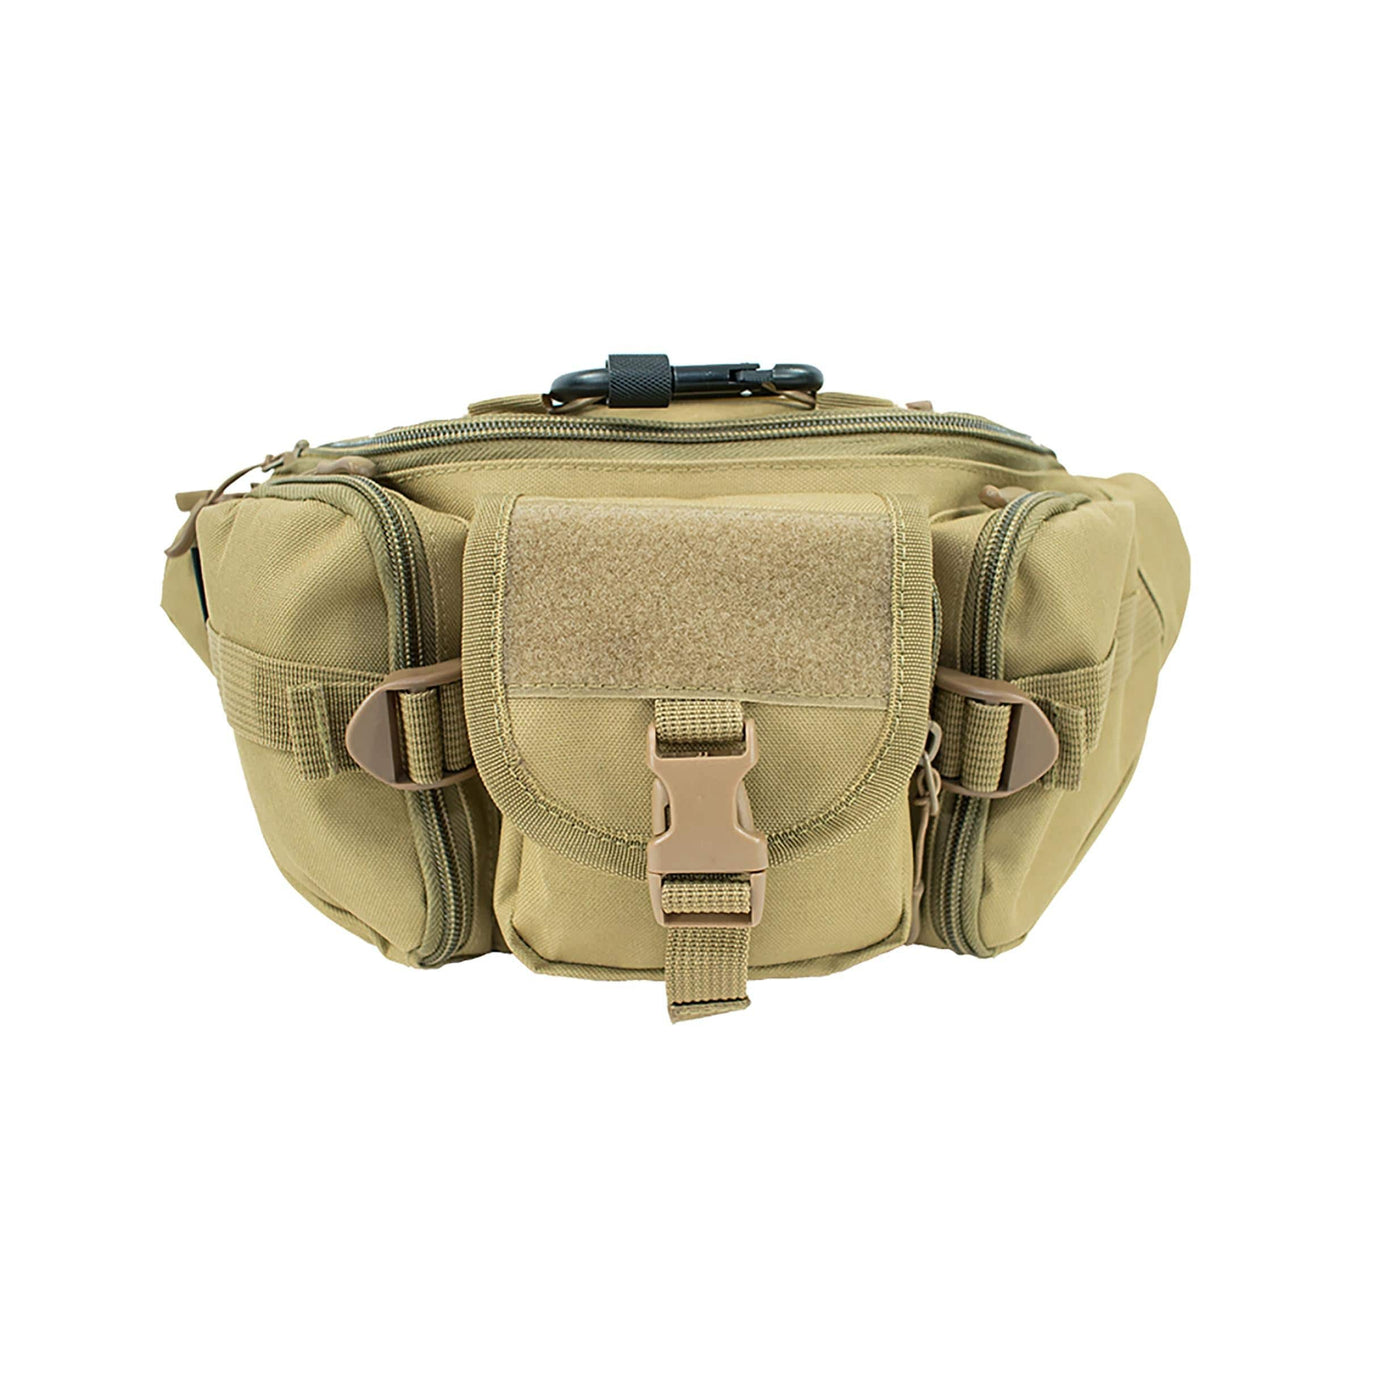 Osage River Osage River Waist/Fanny Pack Coyote Tan Camping And Outdoor